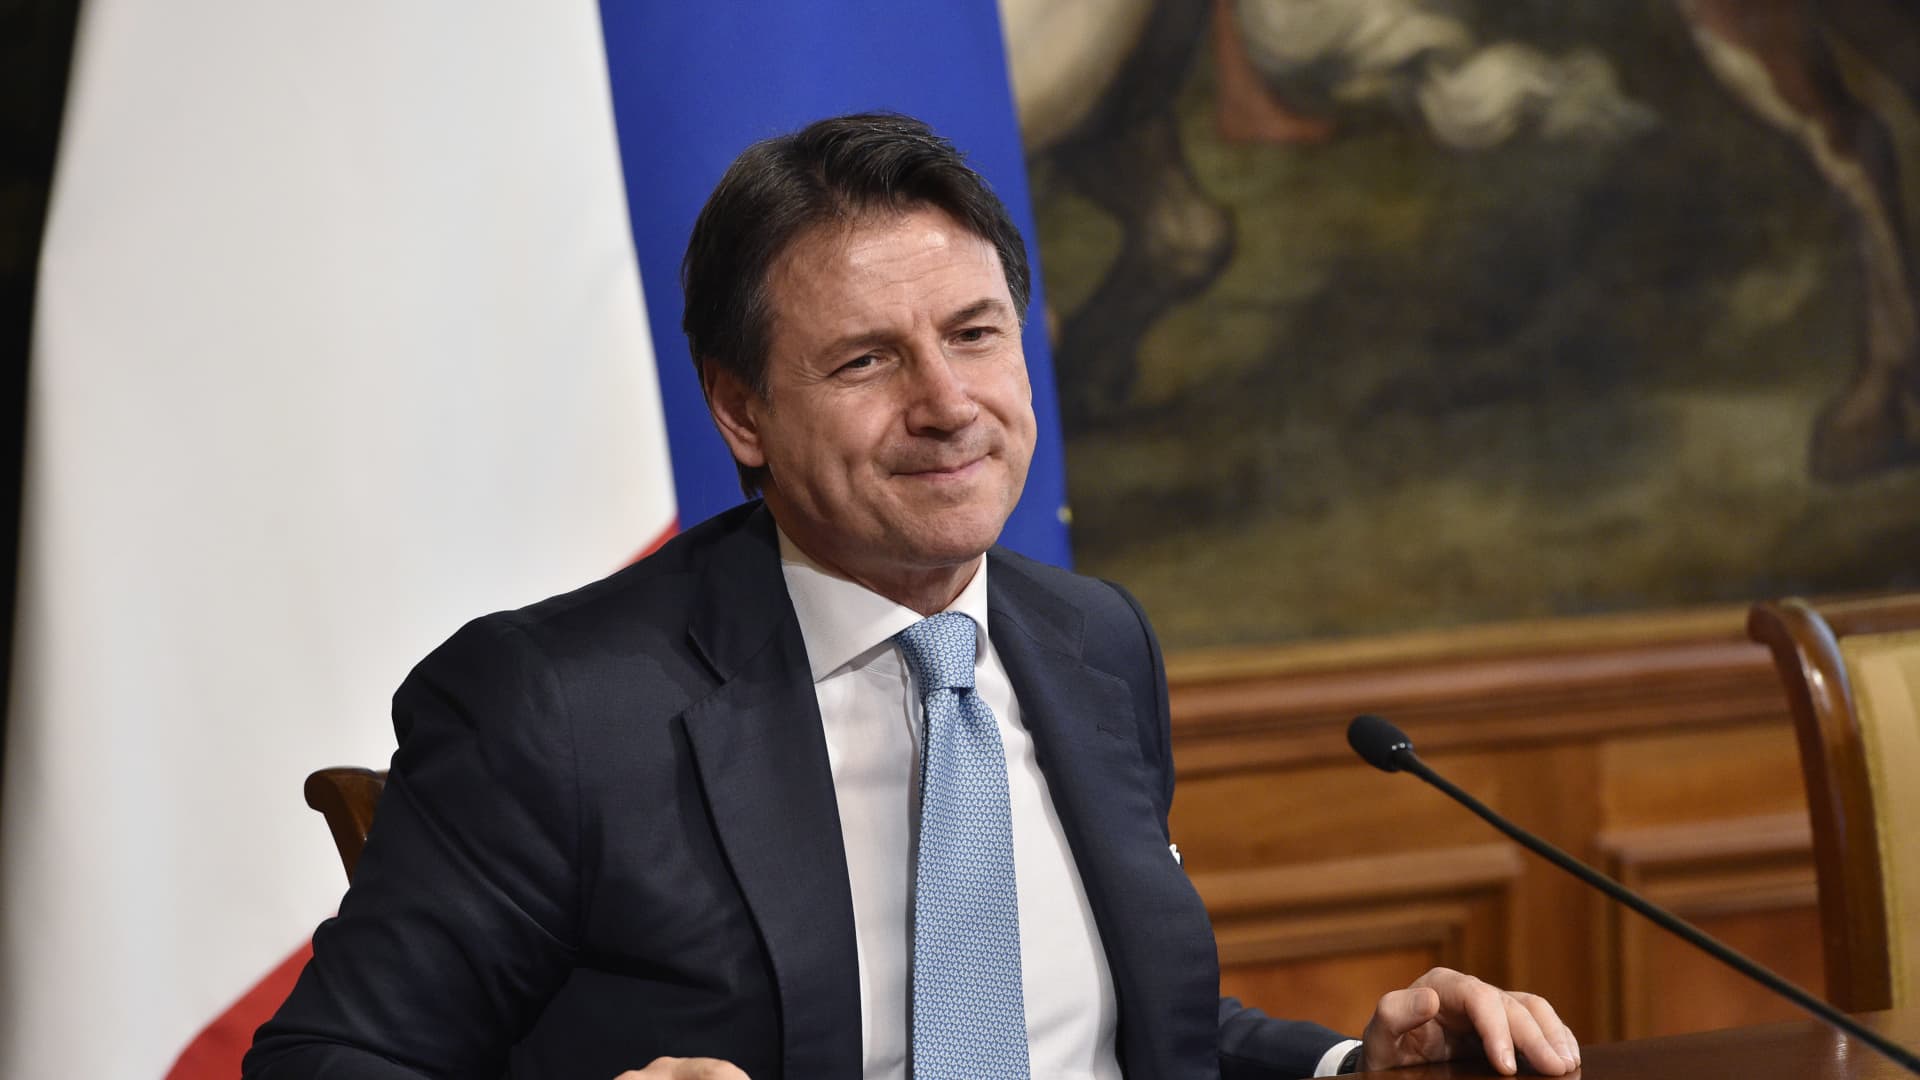 Italian Prime Minister Giuseppe Conte holds a press conference on July 7, 2020 in Rome, Italy.